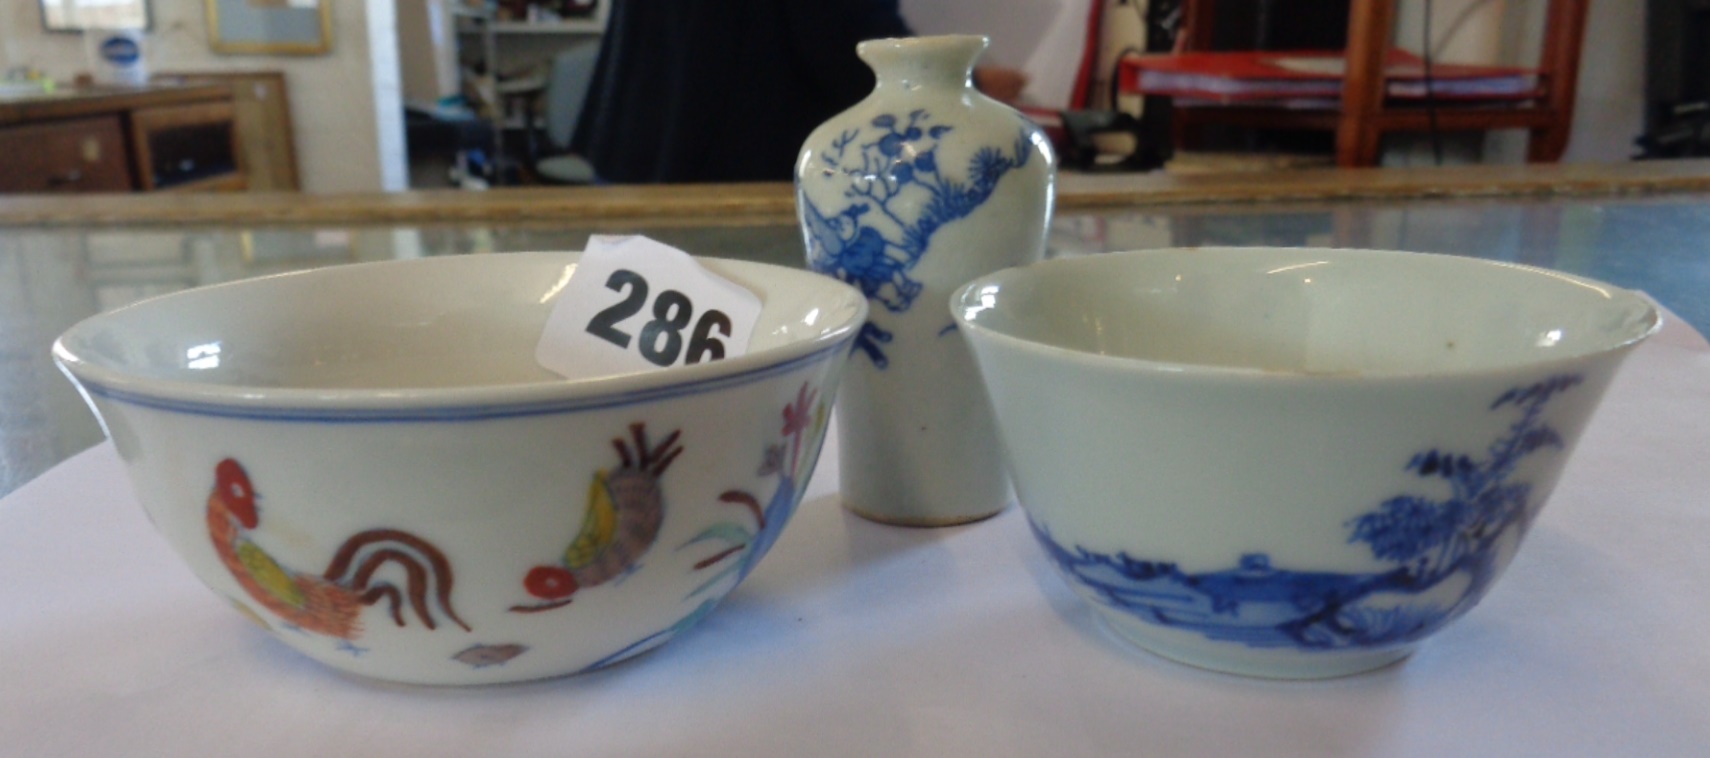 18th c. Chinese blue and white porcelain tea bowl, another with painted chickens, and a miniature - Image 4 of 5